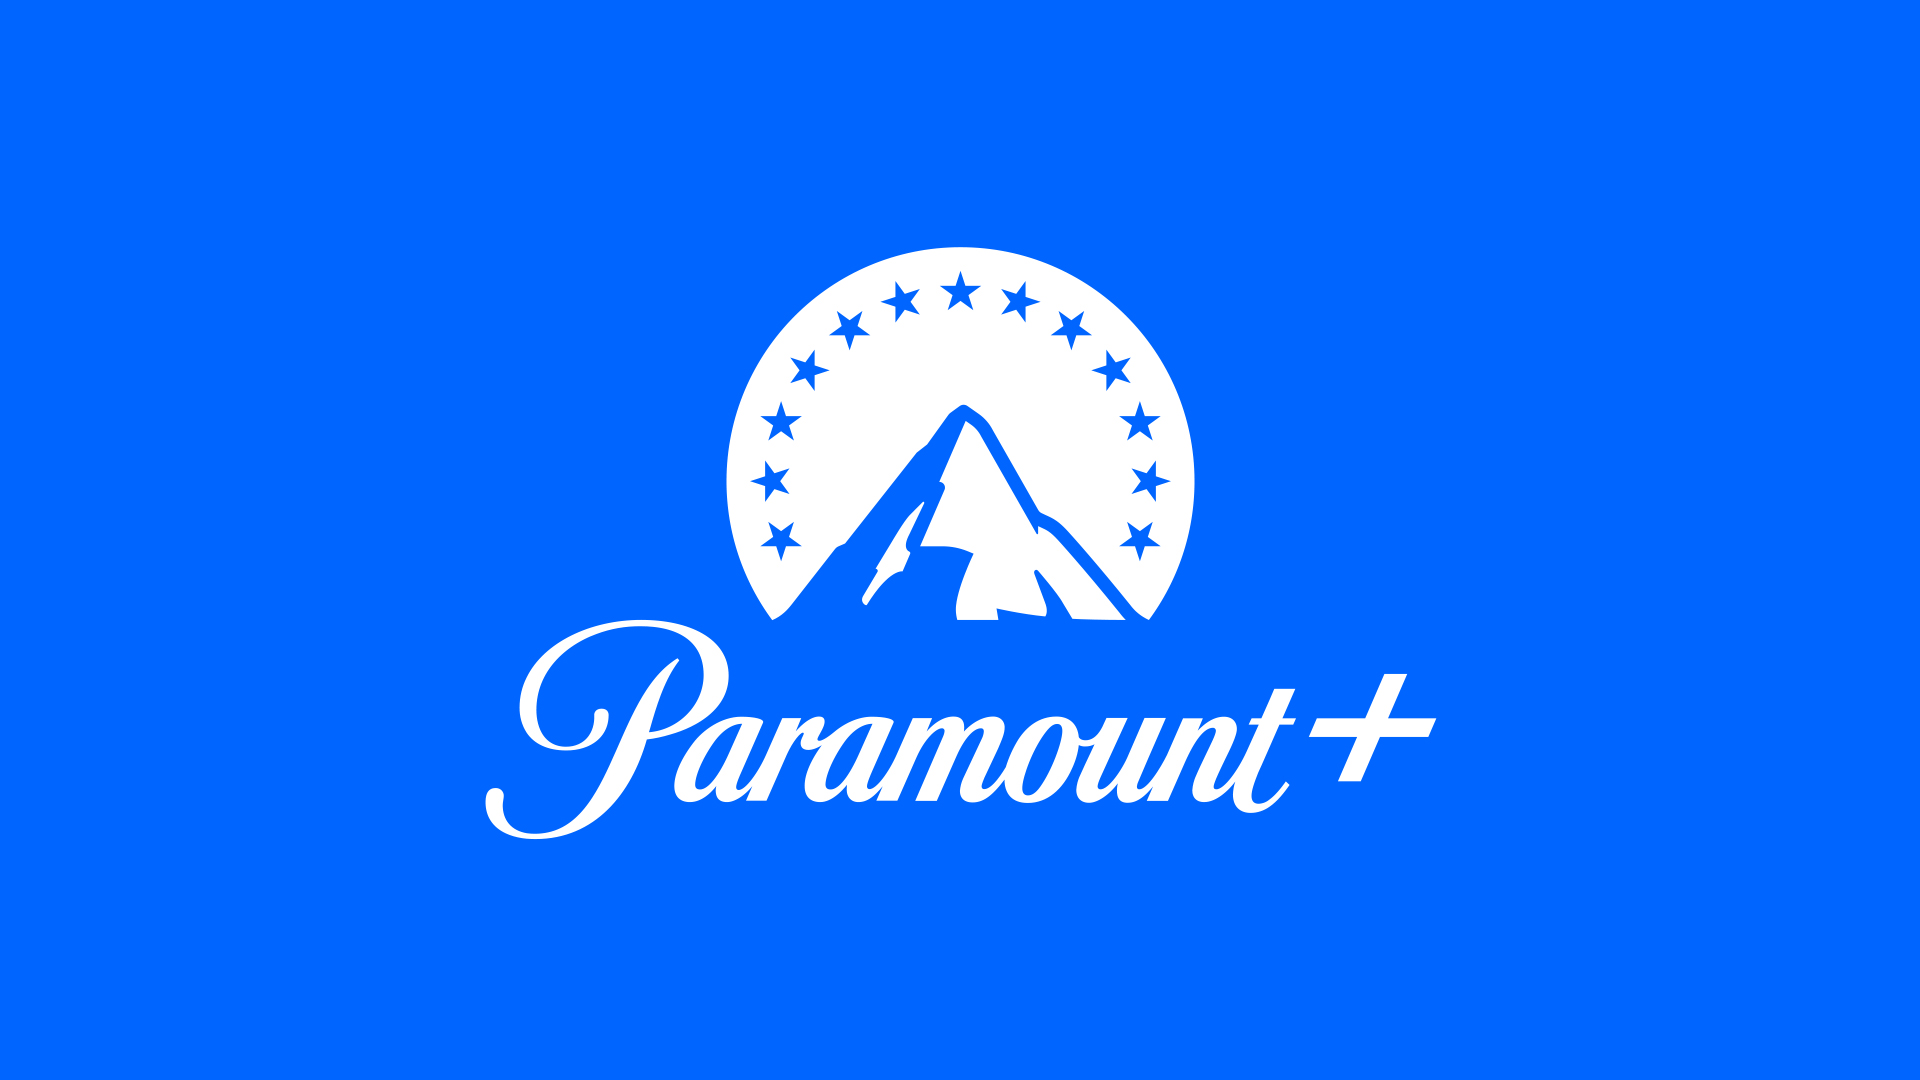 Last chance: get 50% off at Paramount + with an annual plan